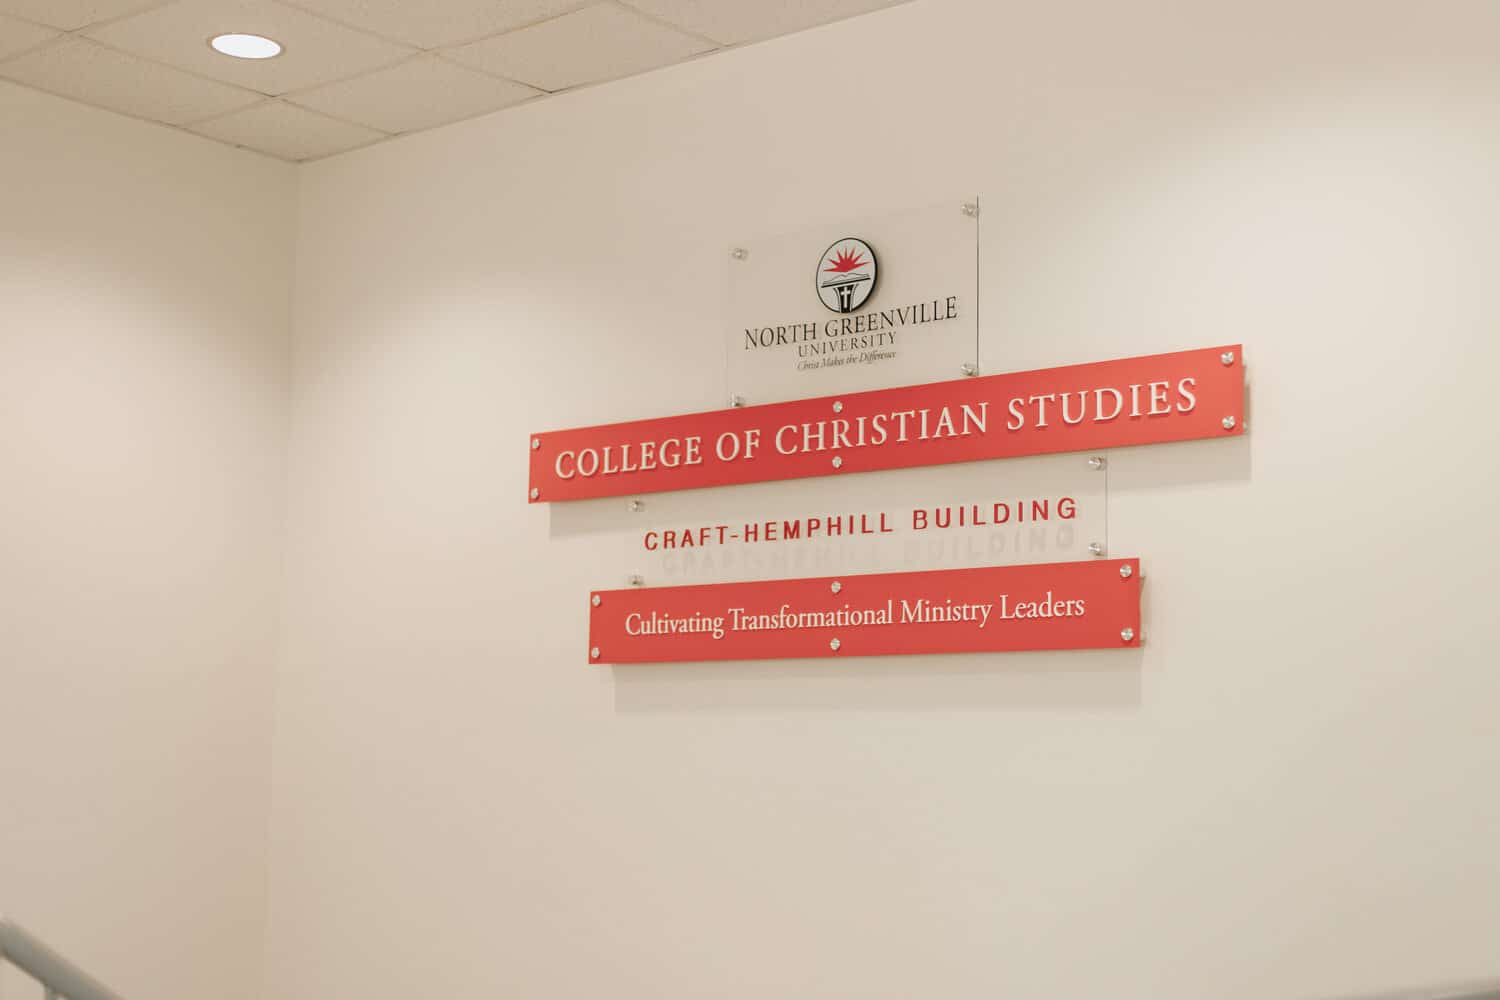 The new College of Christian Studies sign in the Craft-Hemphill Building.